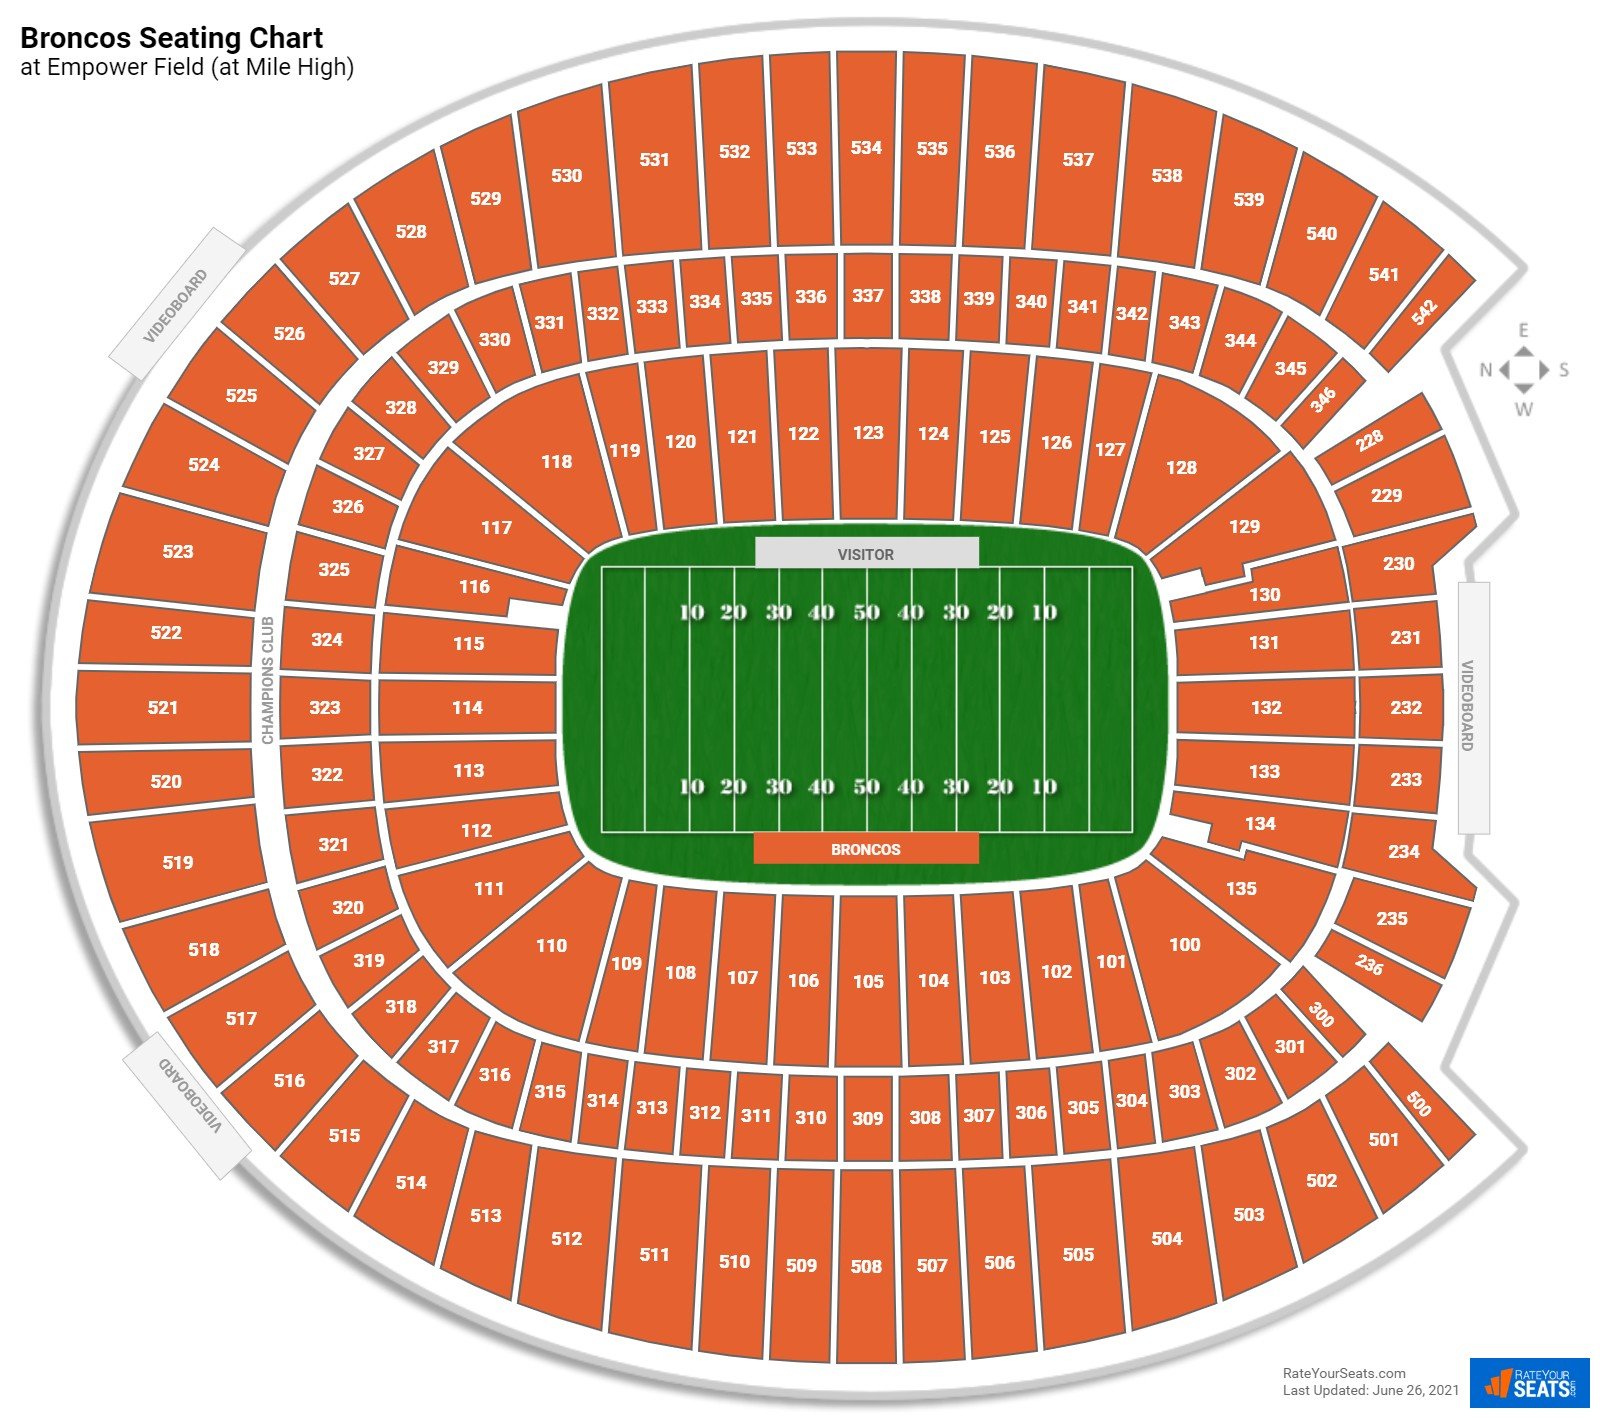 Denver Broncos Seating Chart at Empower Field (at Mile High)